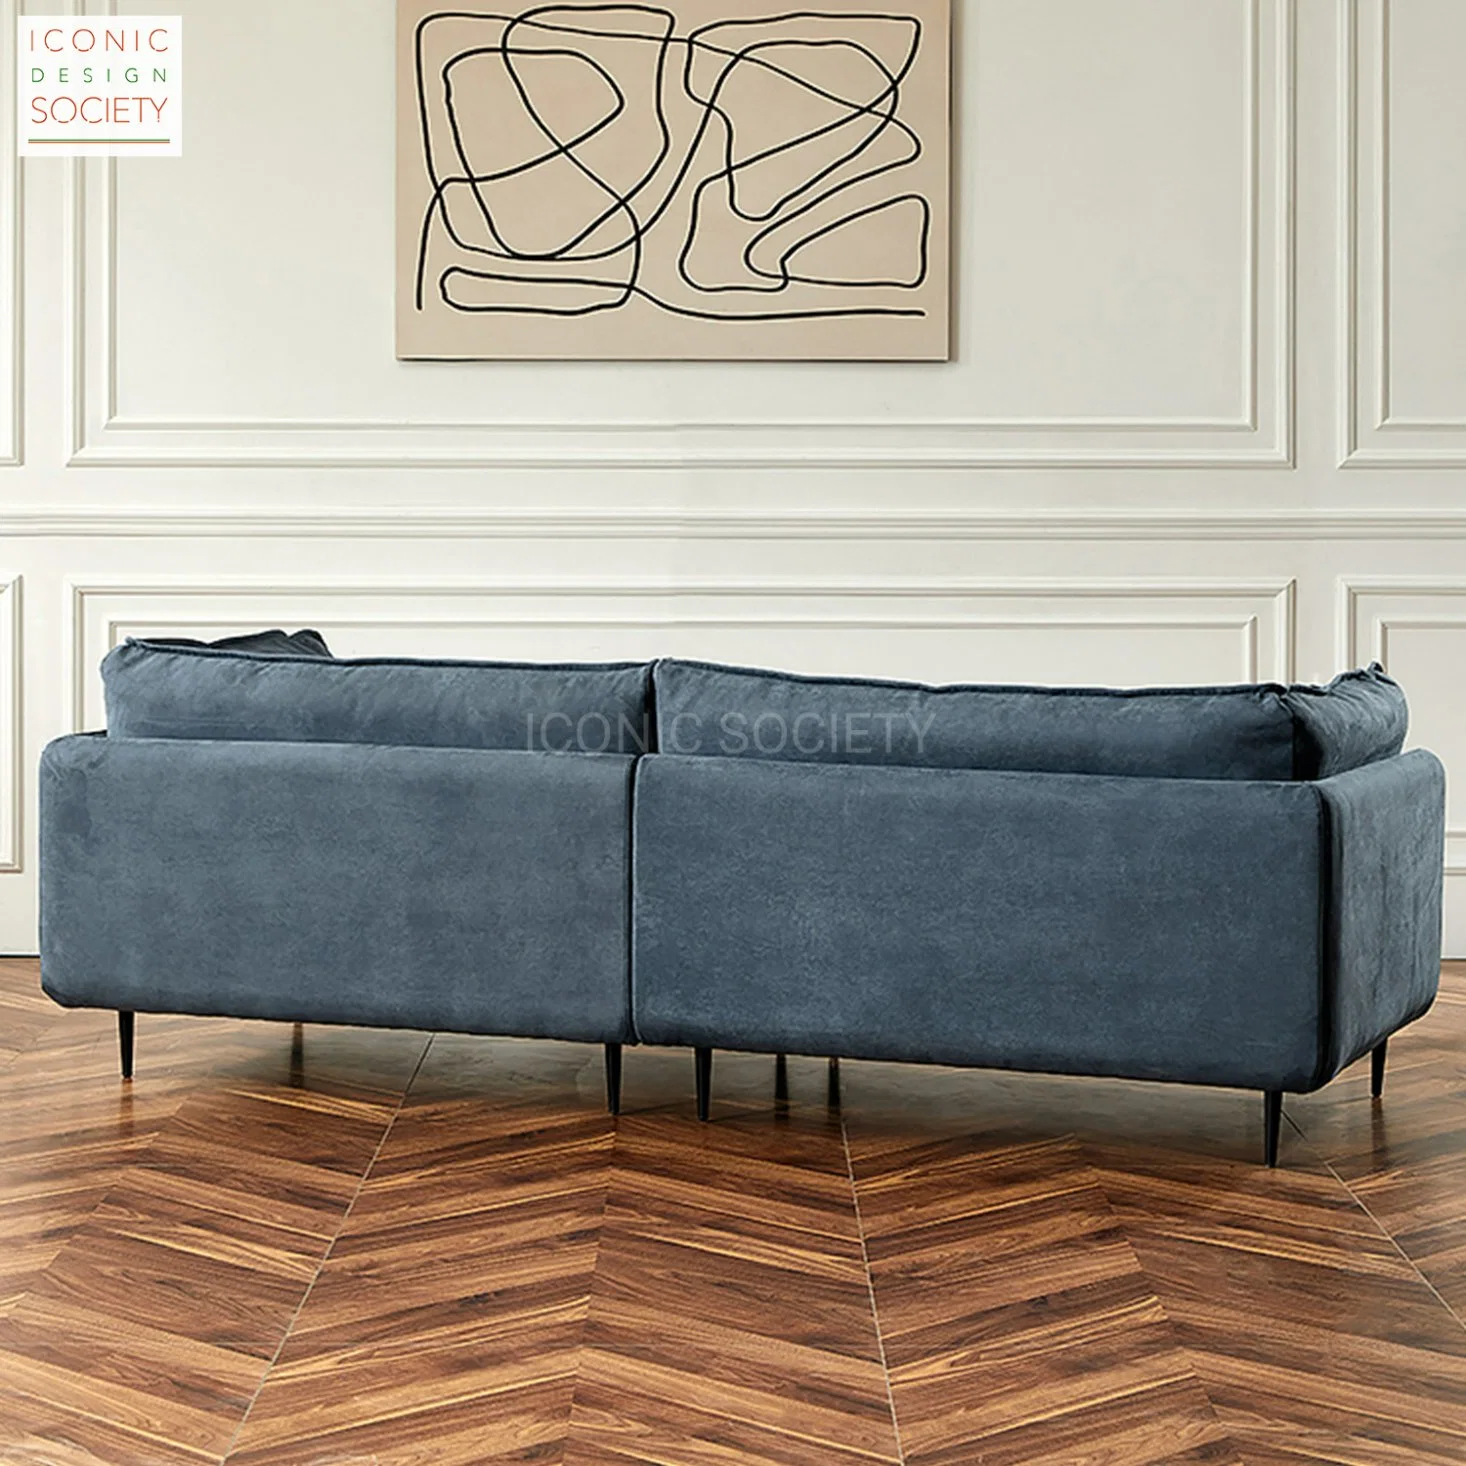 Modern Home Furniture Luxury Living Room Metal Legs Foam Hotel Sectional Office Leisure Couch Velvet Fabric Sofa